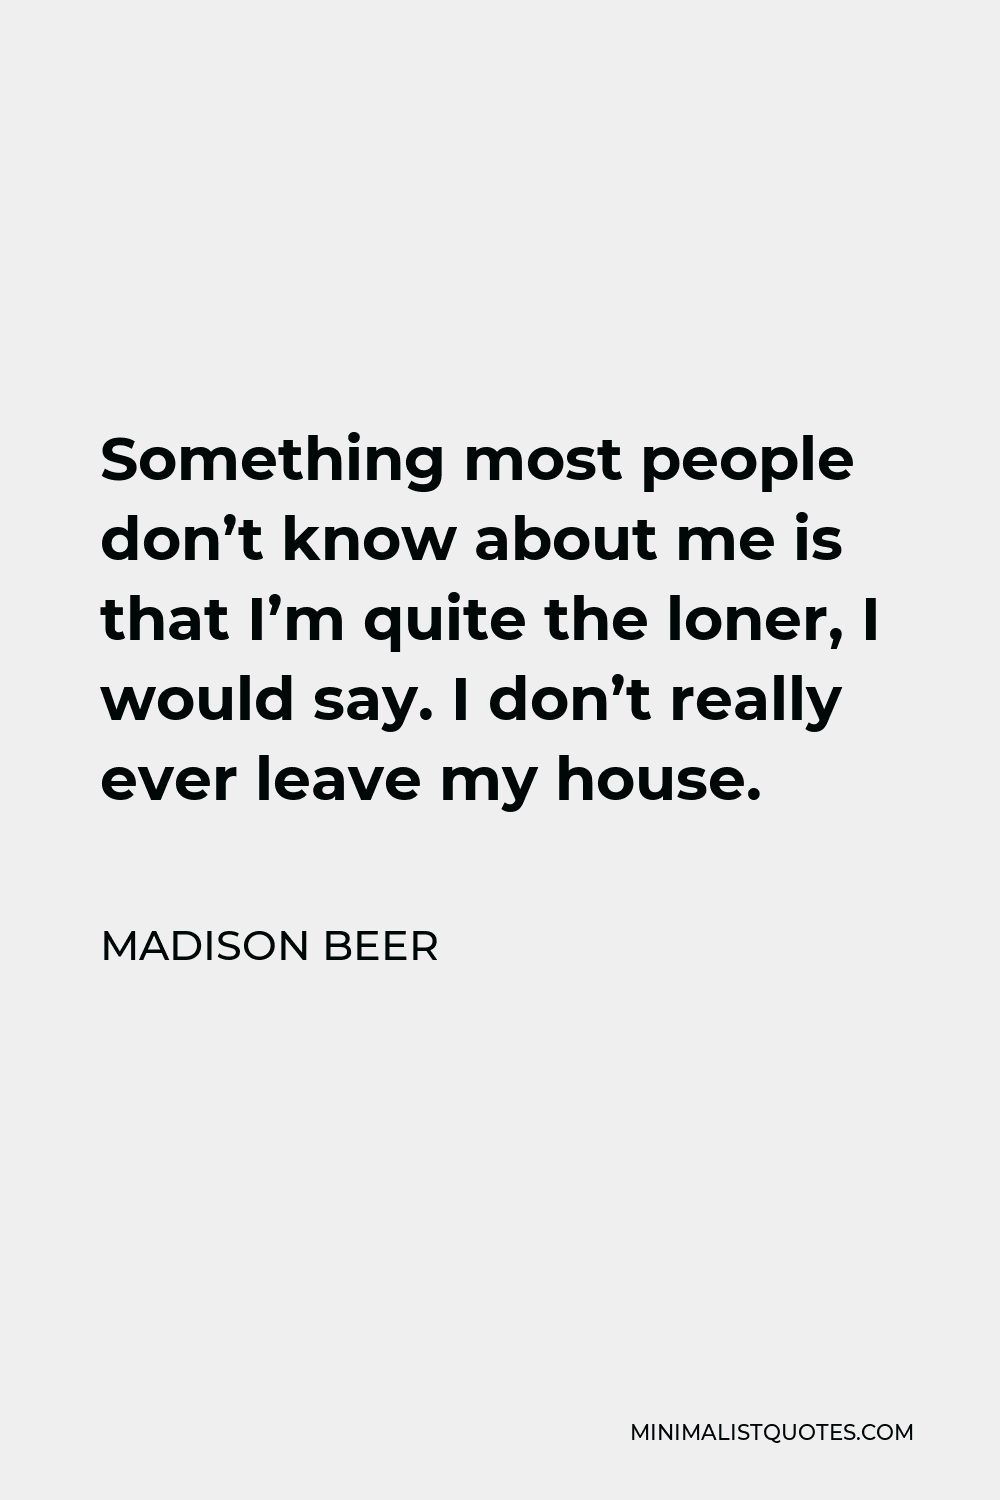 Madison Beer Quote - Something most people don’t know about me is that I’m quite the loner, I would say. I don’t really ever leave my house.